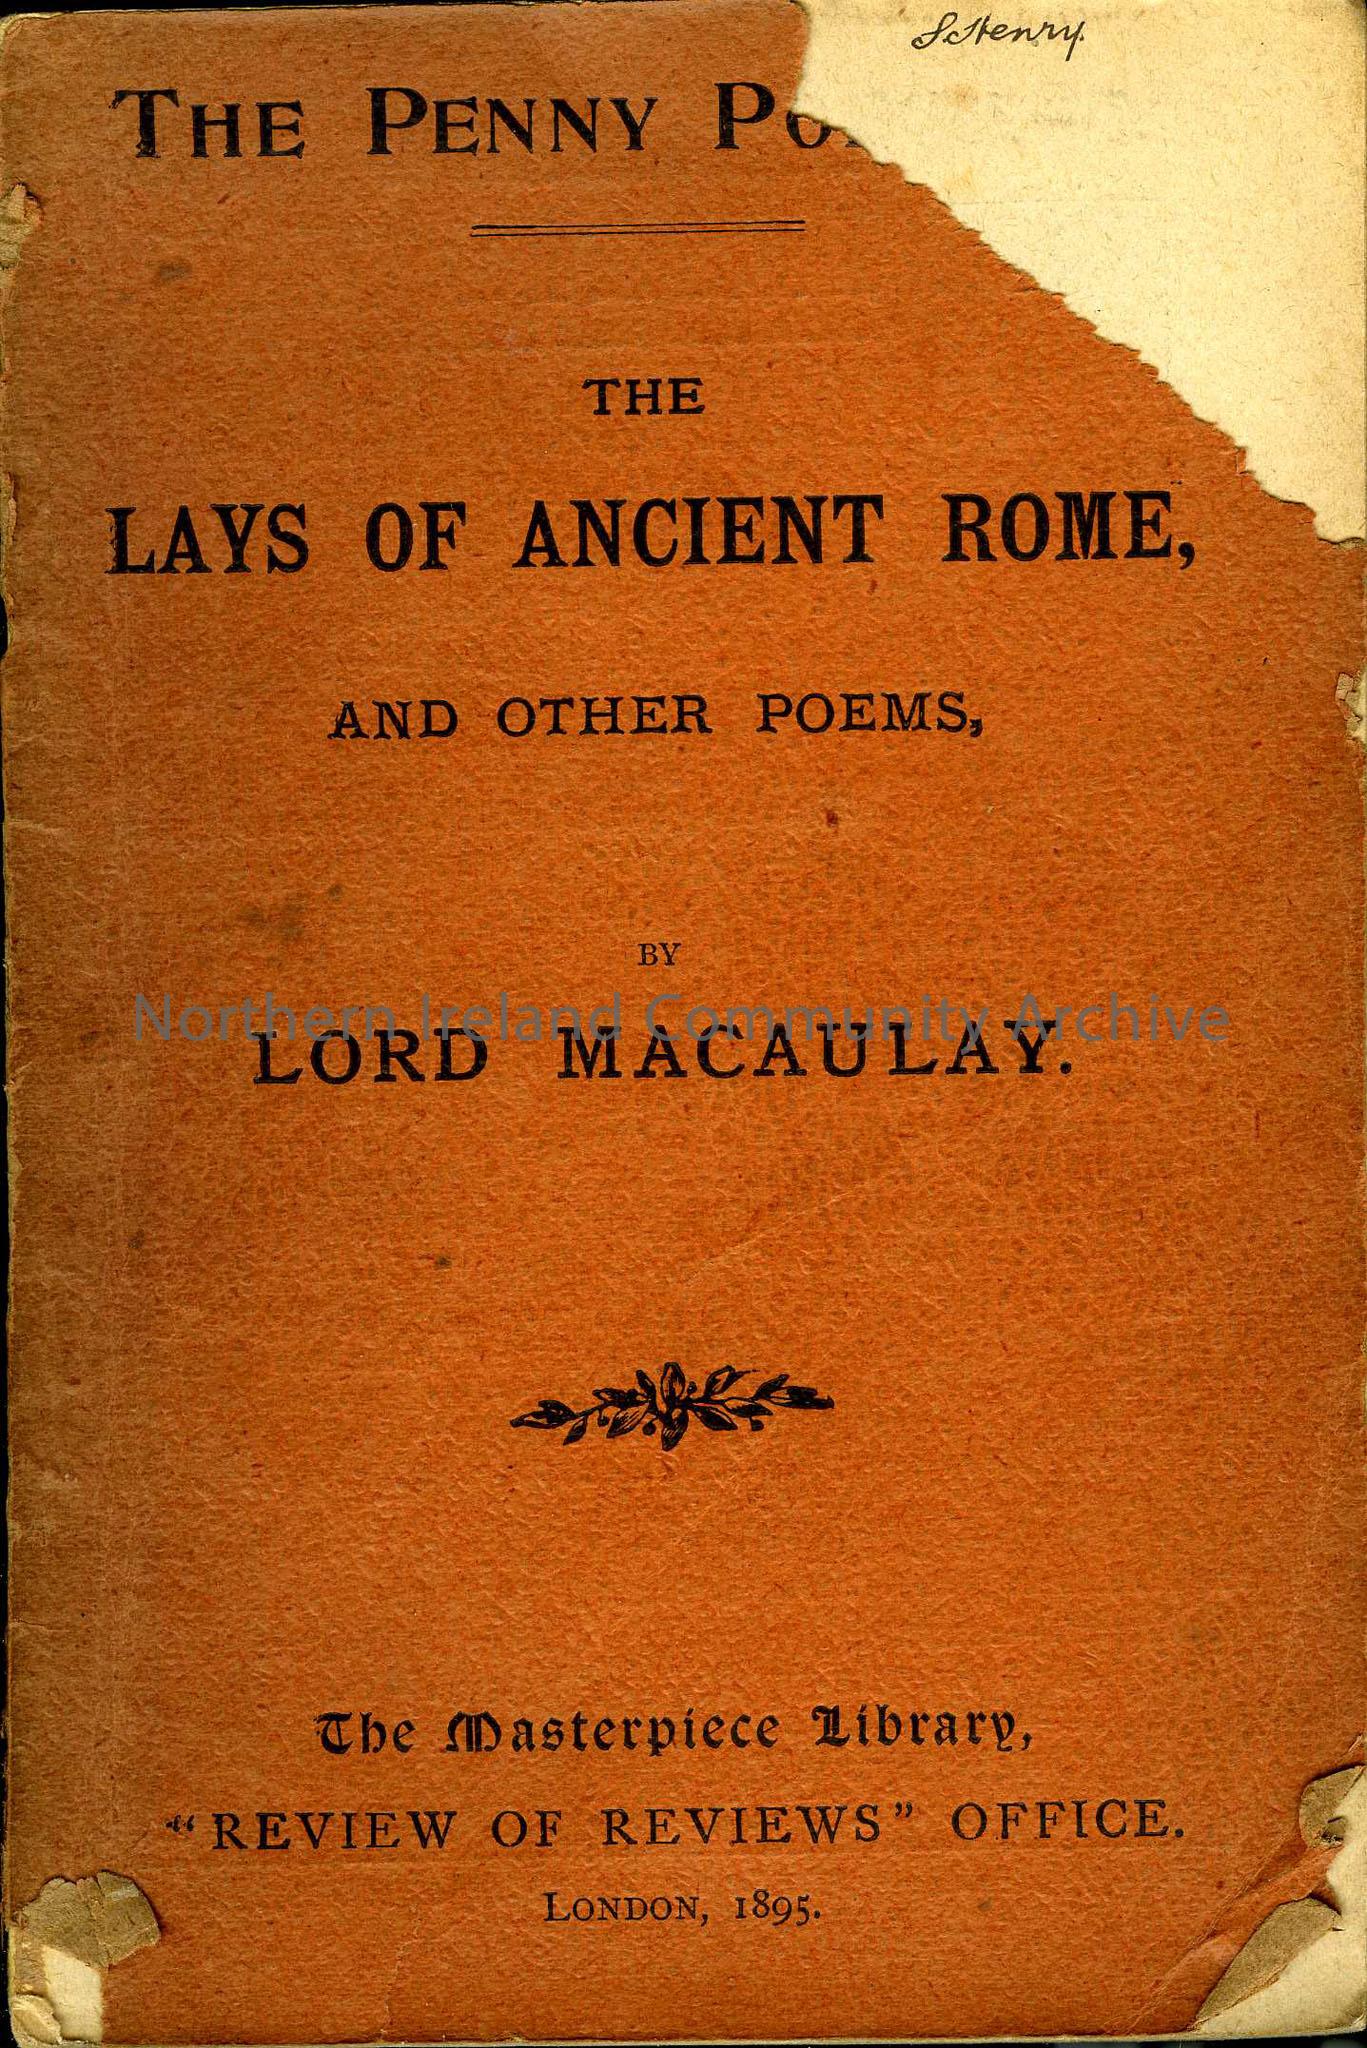 The Lays of Ancient Rome and other Poems by Lord Macaulay